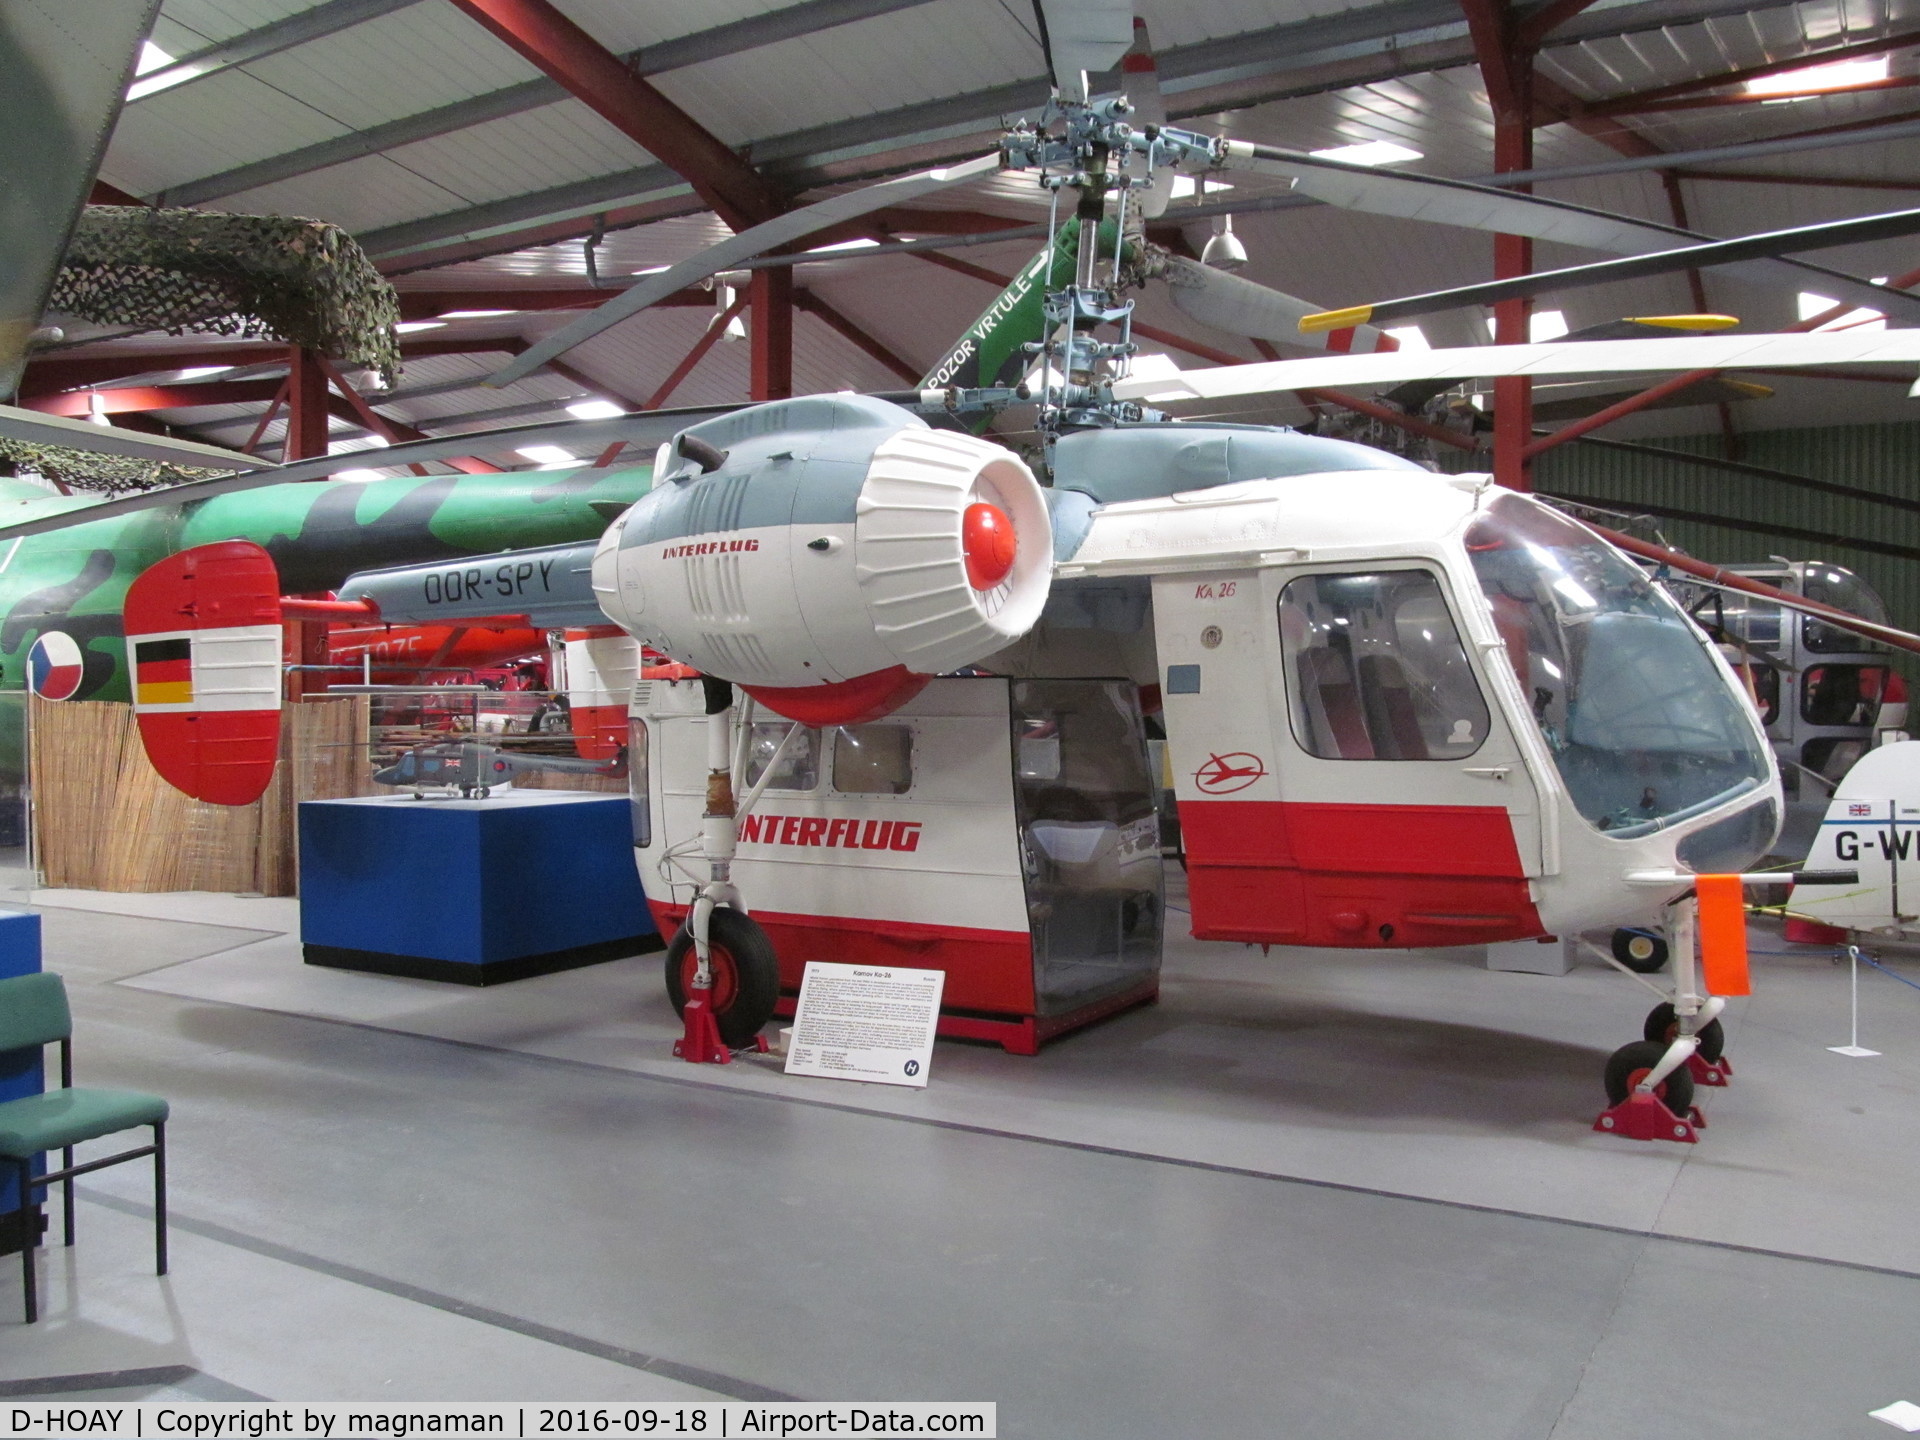 D-HOAY, 1973 Kamov Ka-26 Hoodlum C/N 7001309, Painted as DDR-SPY.  At The Helicopter Museum, Weston-super-Mare, UK.